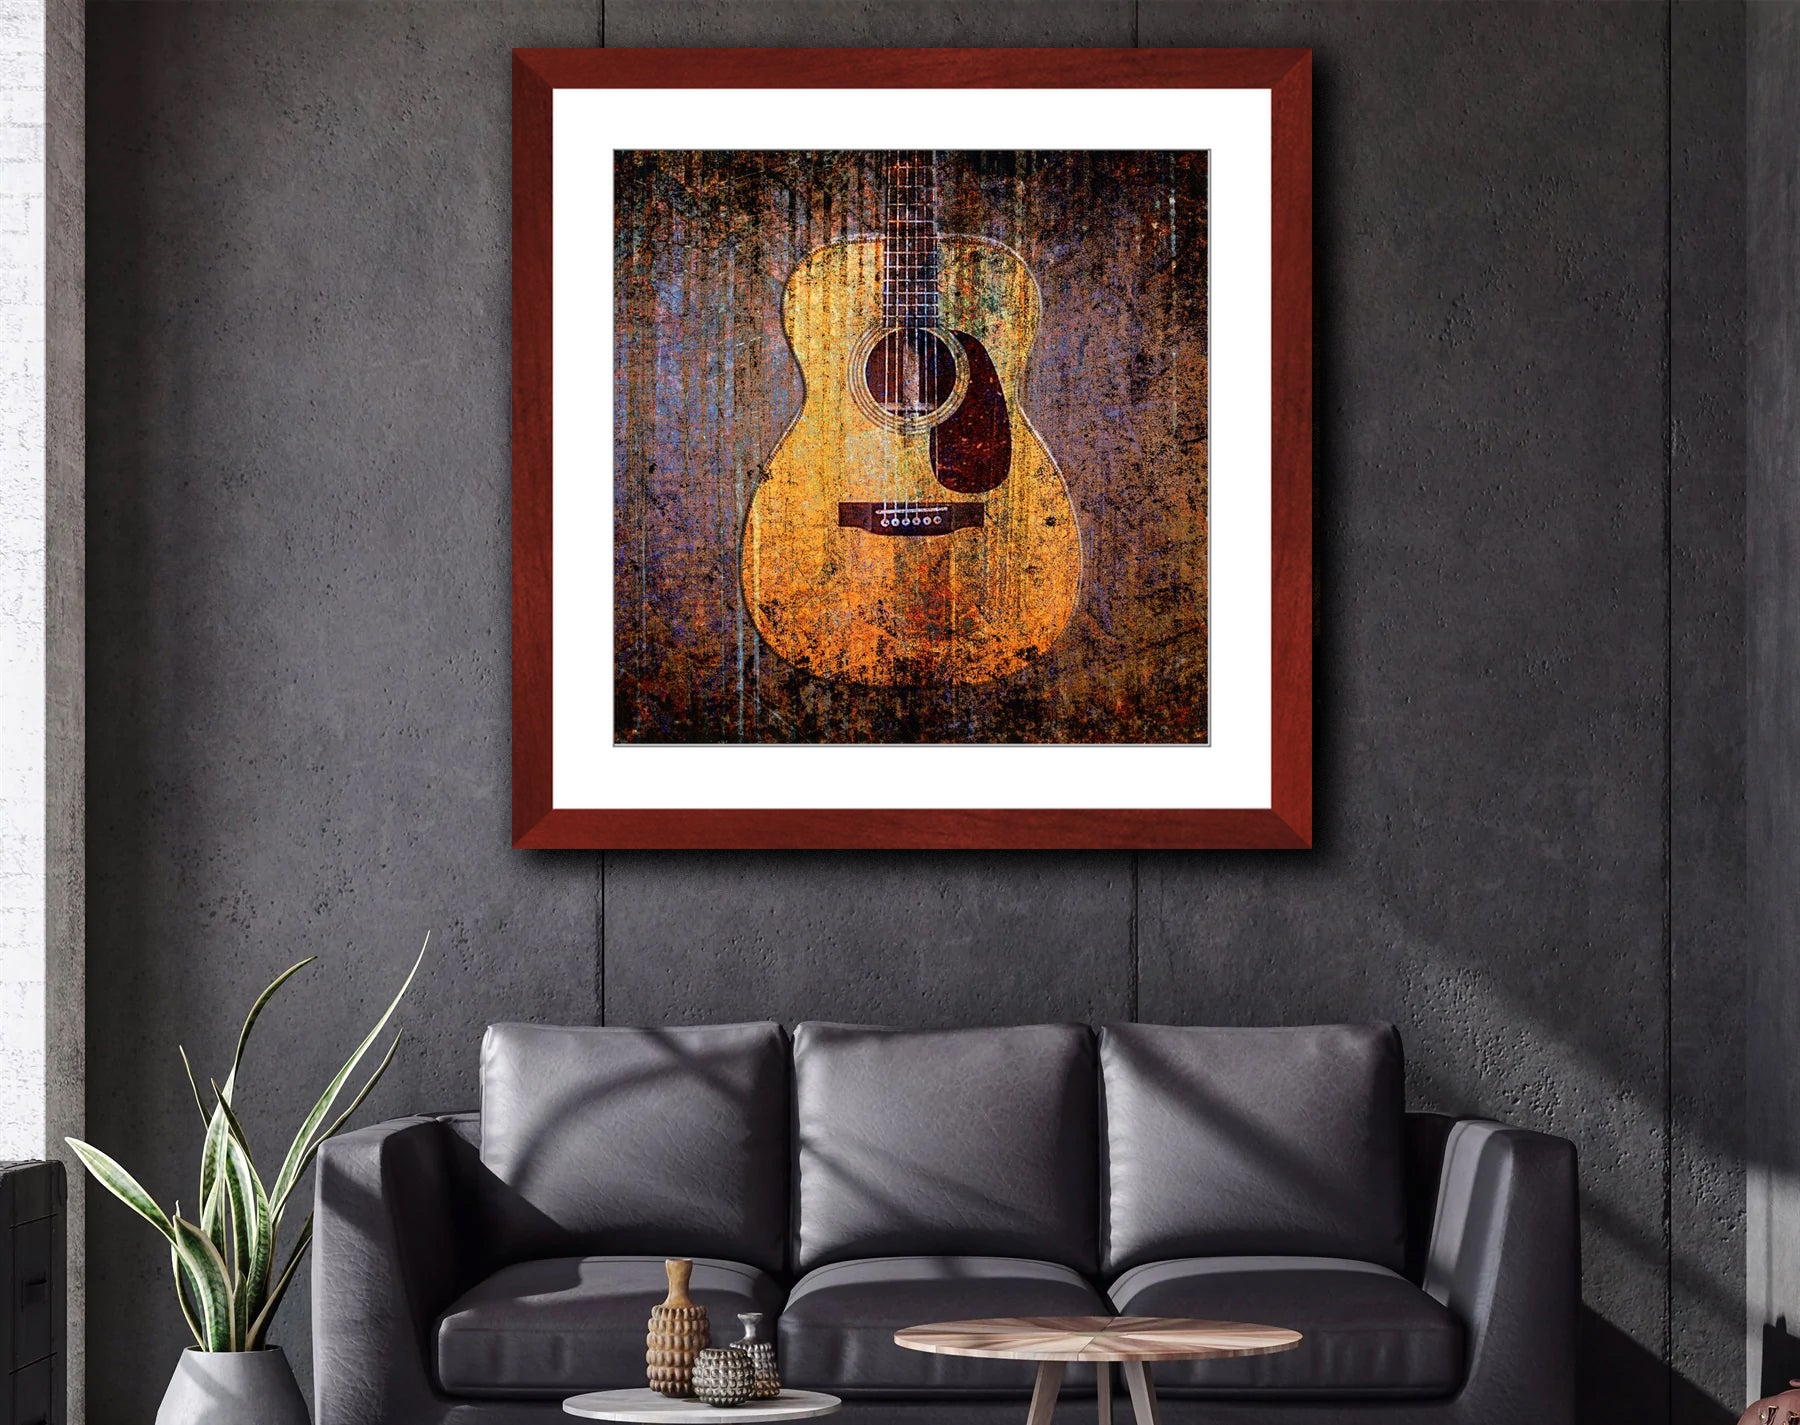 Acoustic Guitar Print on Archival Paper in Cherry Color Wood Frame hung